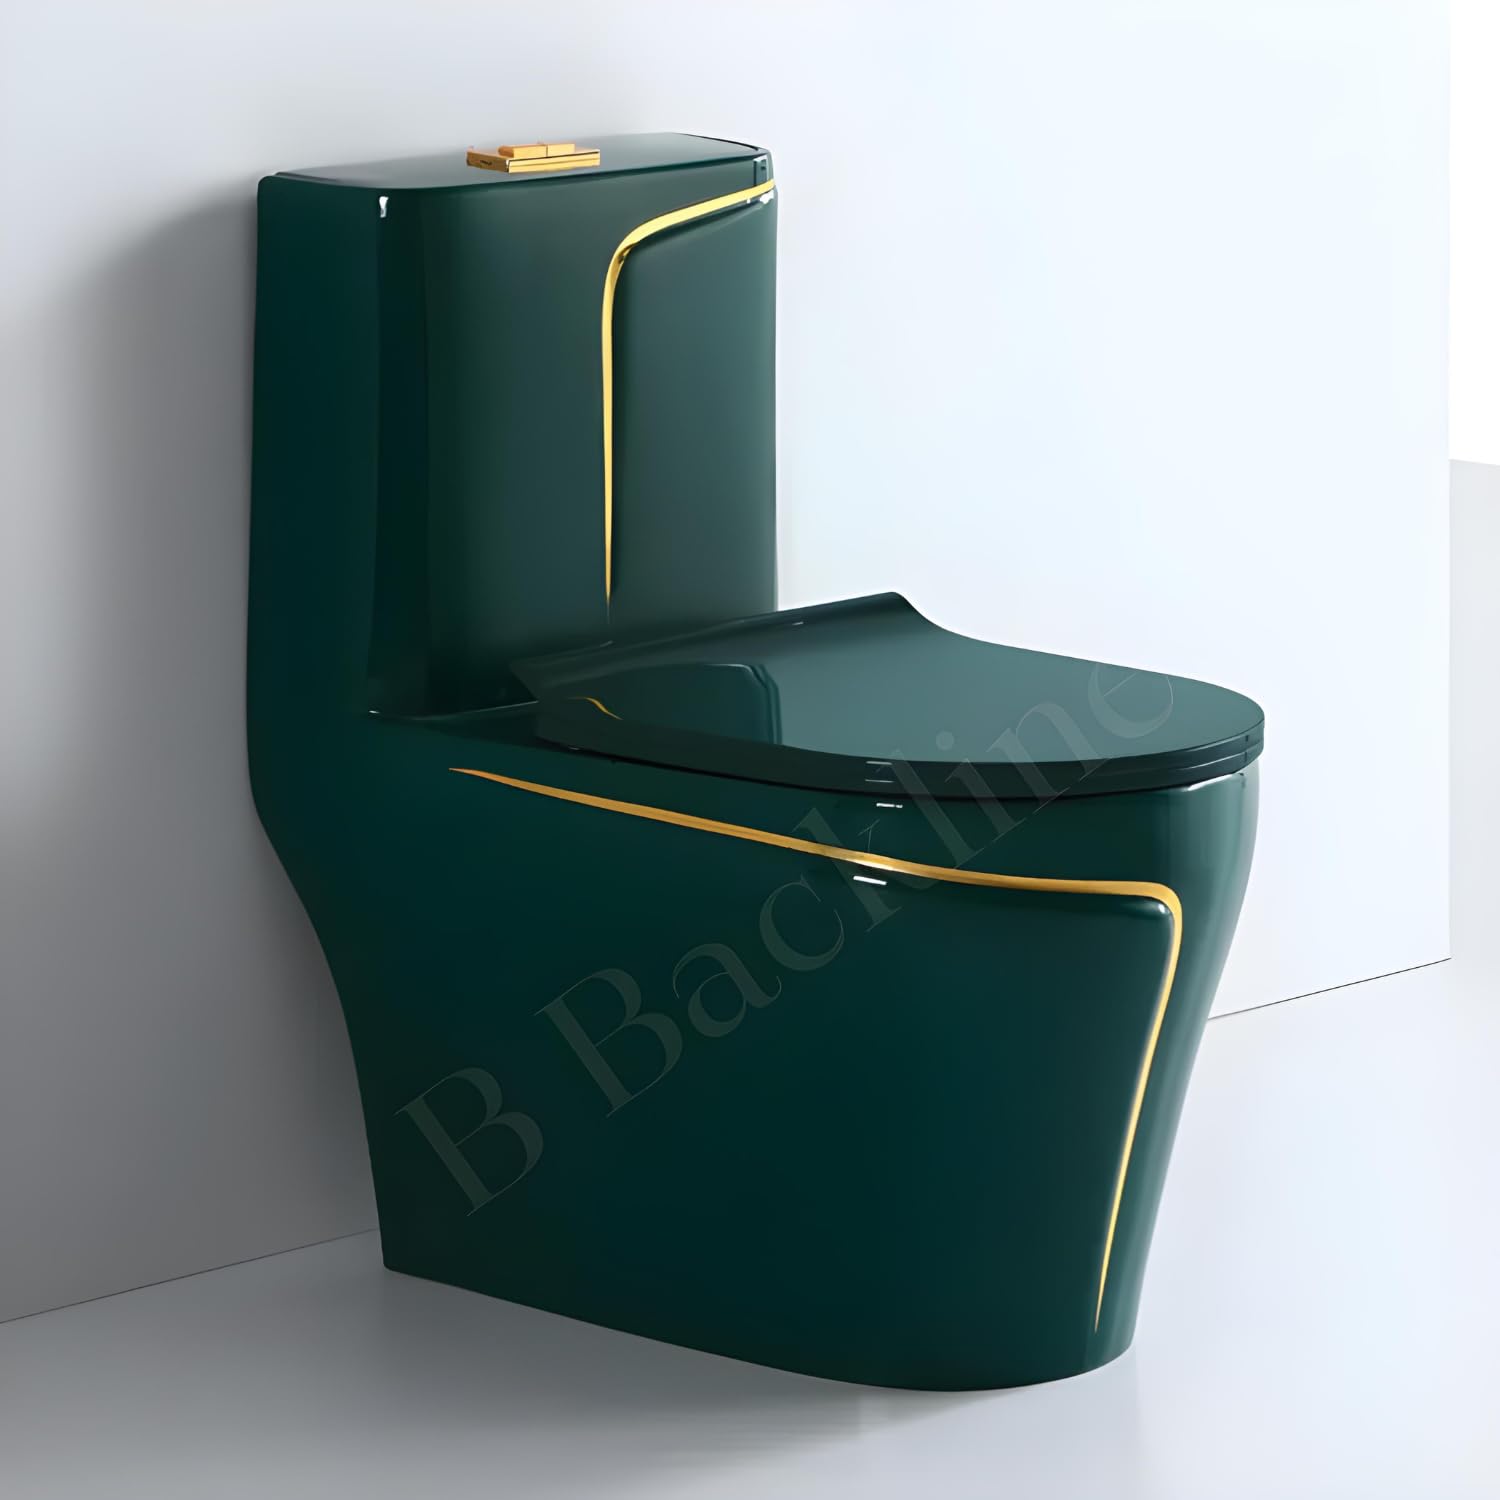 B Backline Ceramic Floor Mounted One Piece Water Closet Commode Western Toilet Syphonic Flushing Bathrooms S Trap Outlet Is From Floor , 12 Inches From Wall To Trap  (Dark Green Glossy)